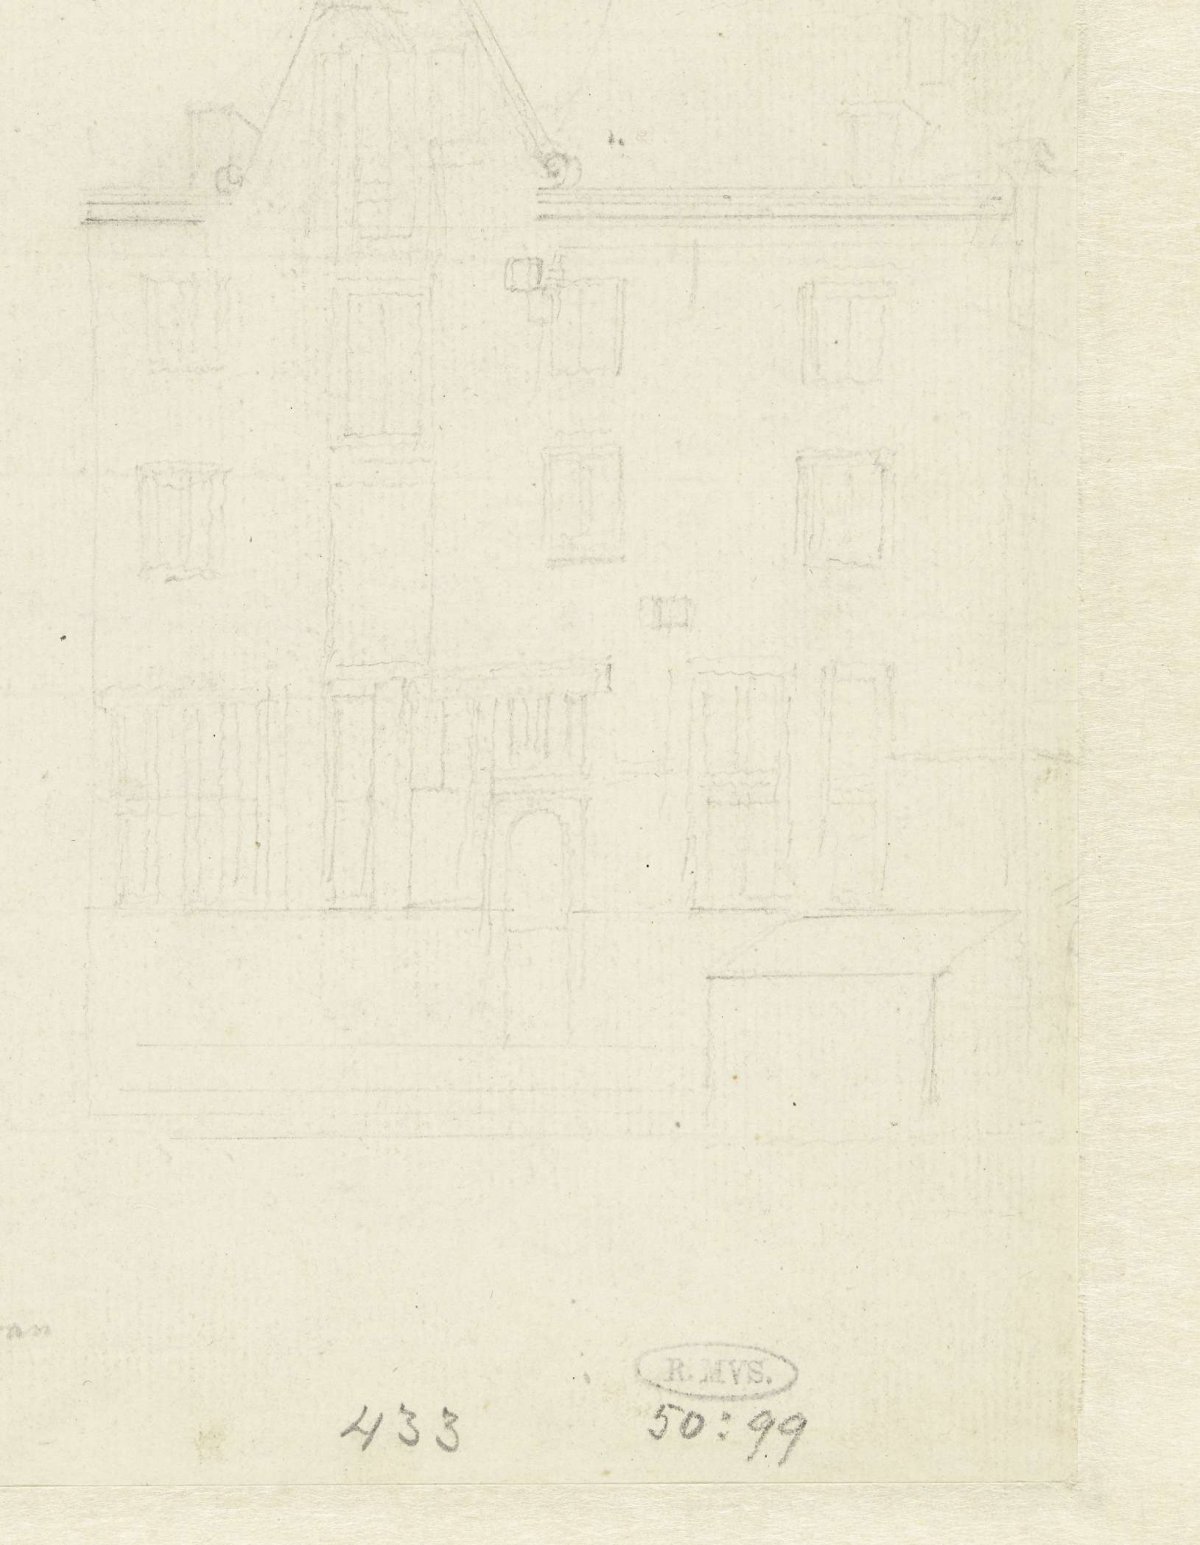 Sketch of a warehouse in Amsterdam (?), Andries Schouten, 1700 - 1800